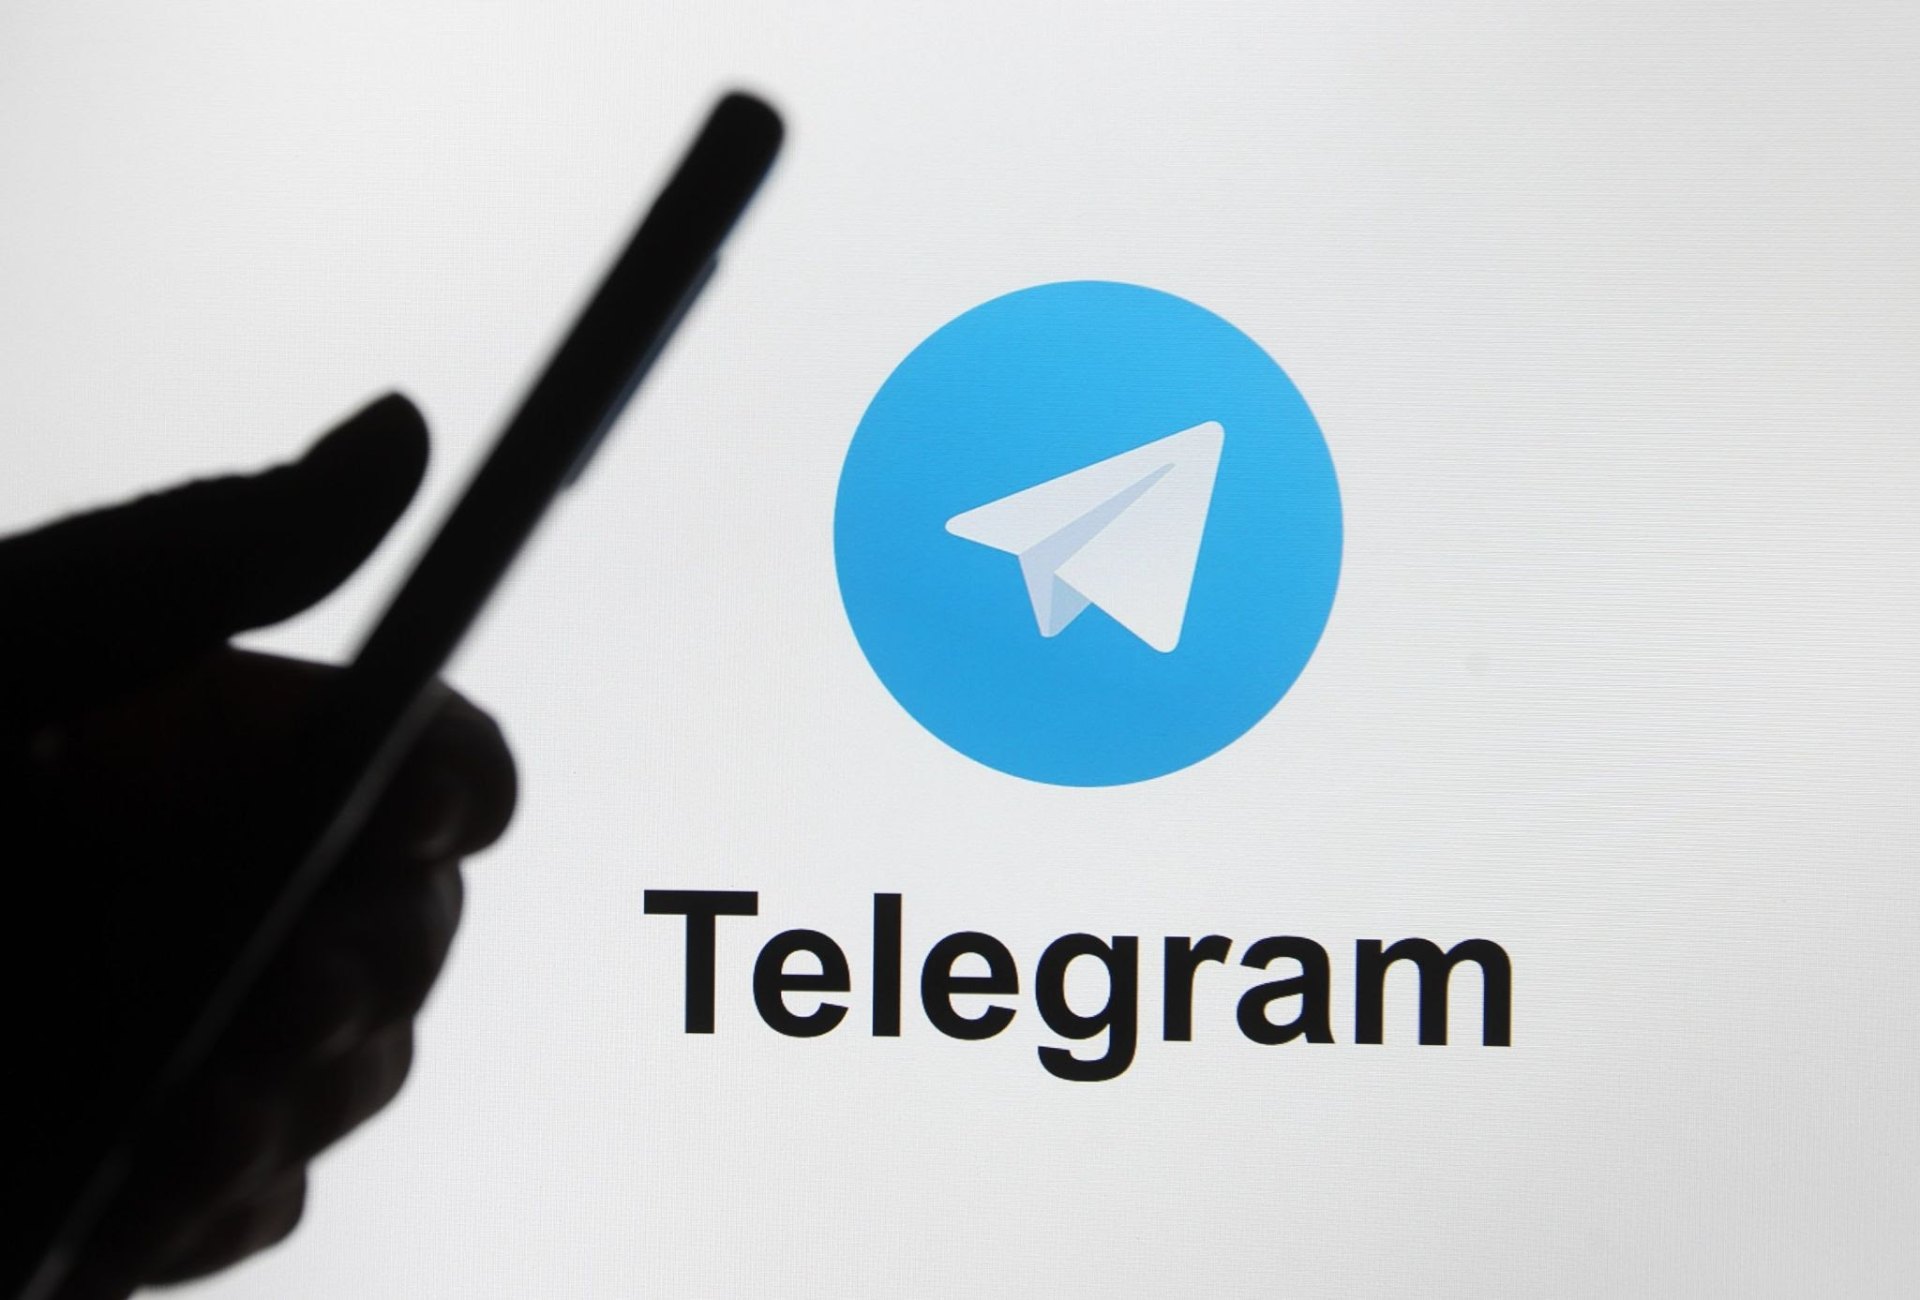 What Are the Best Features that Telegram Offers?